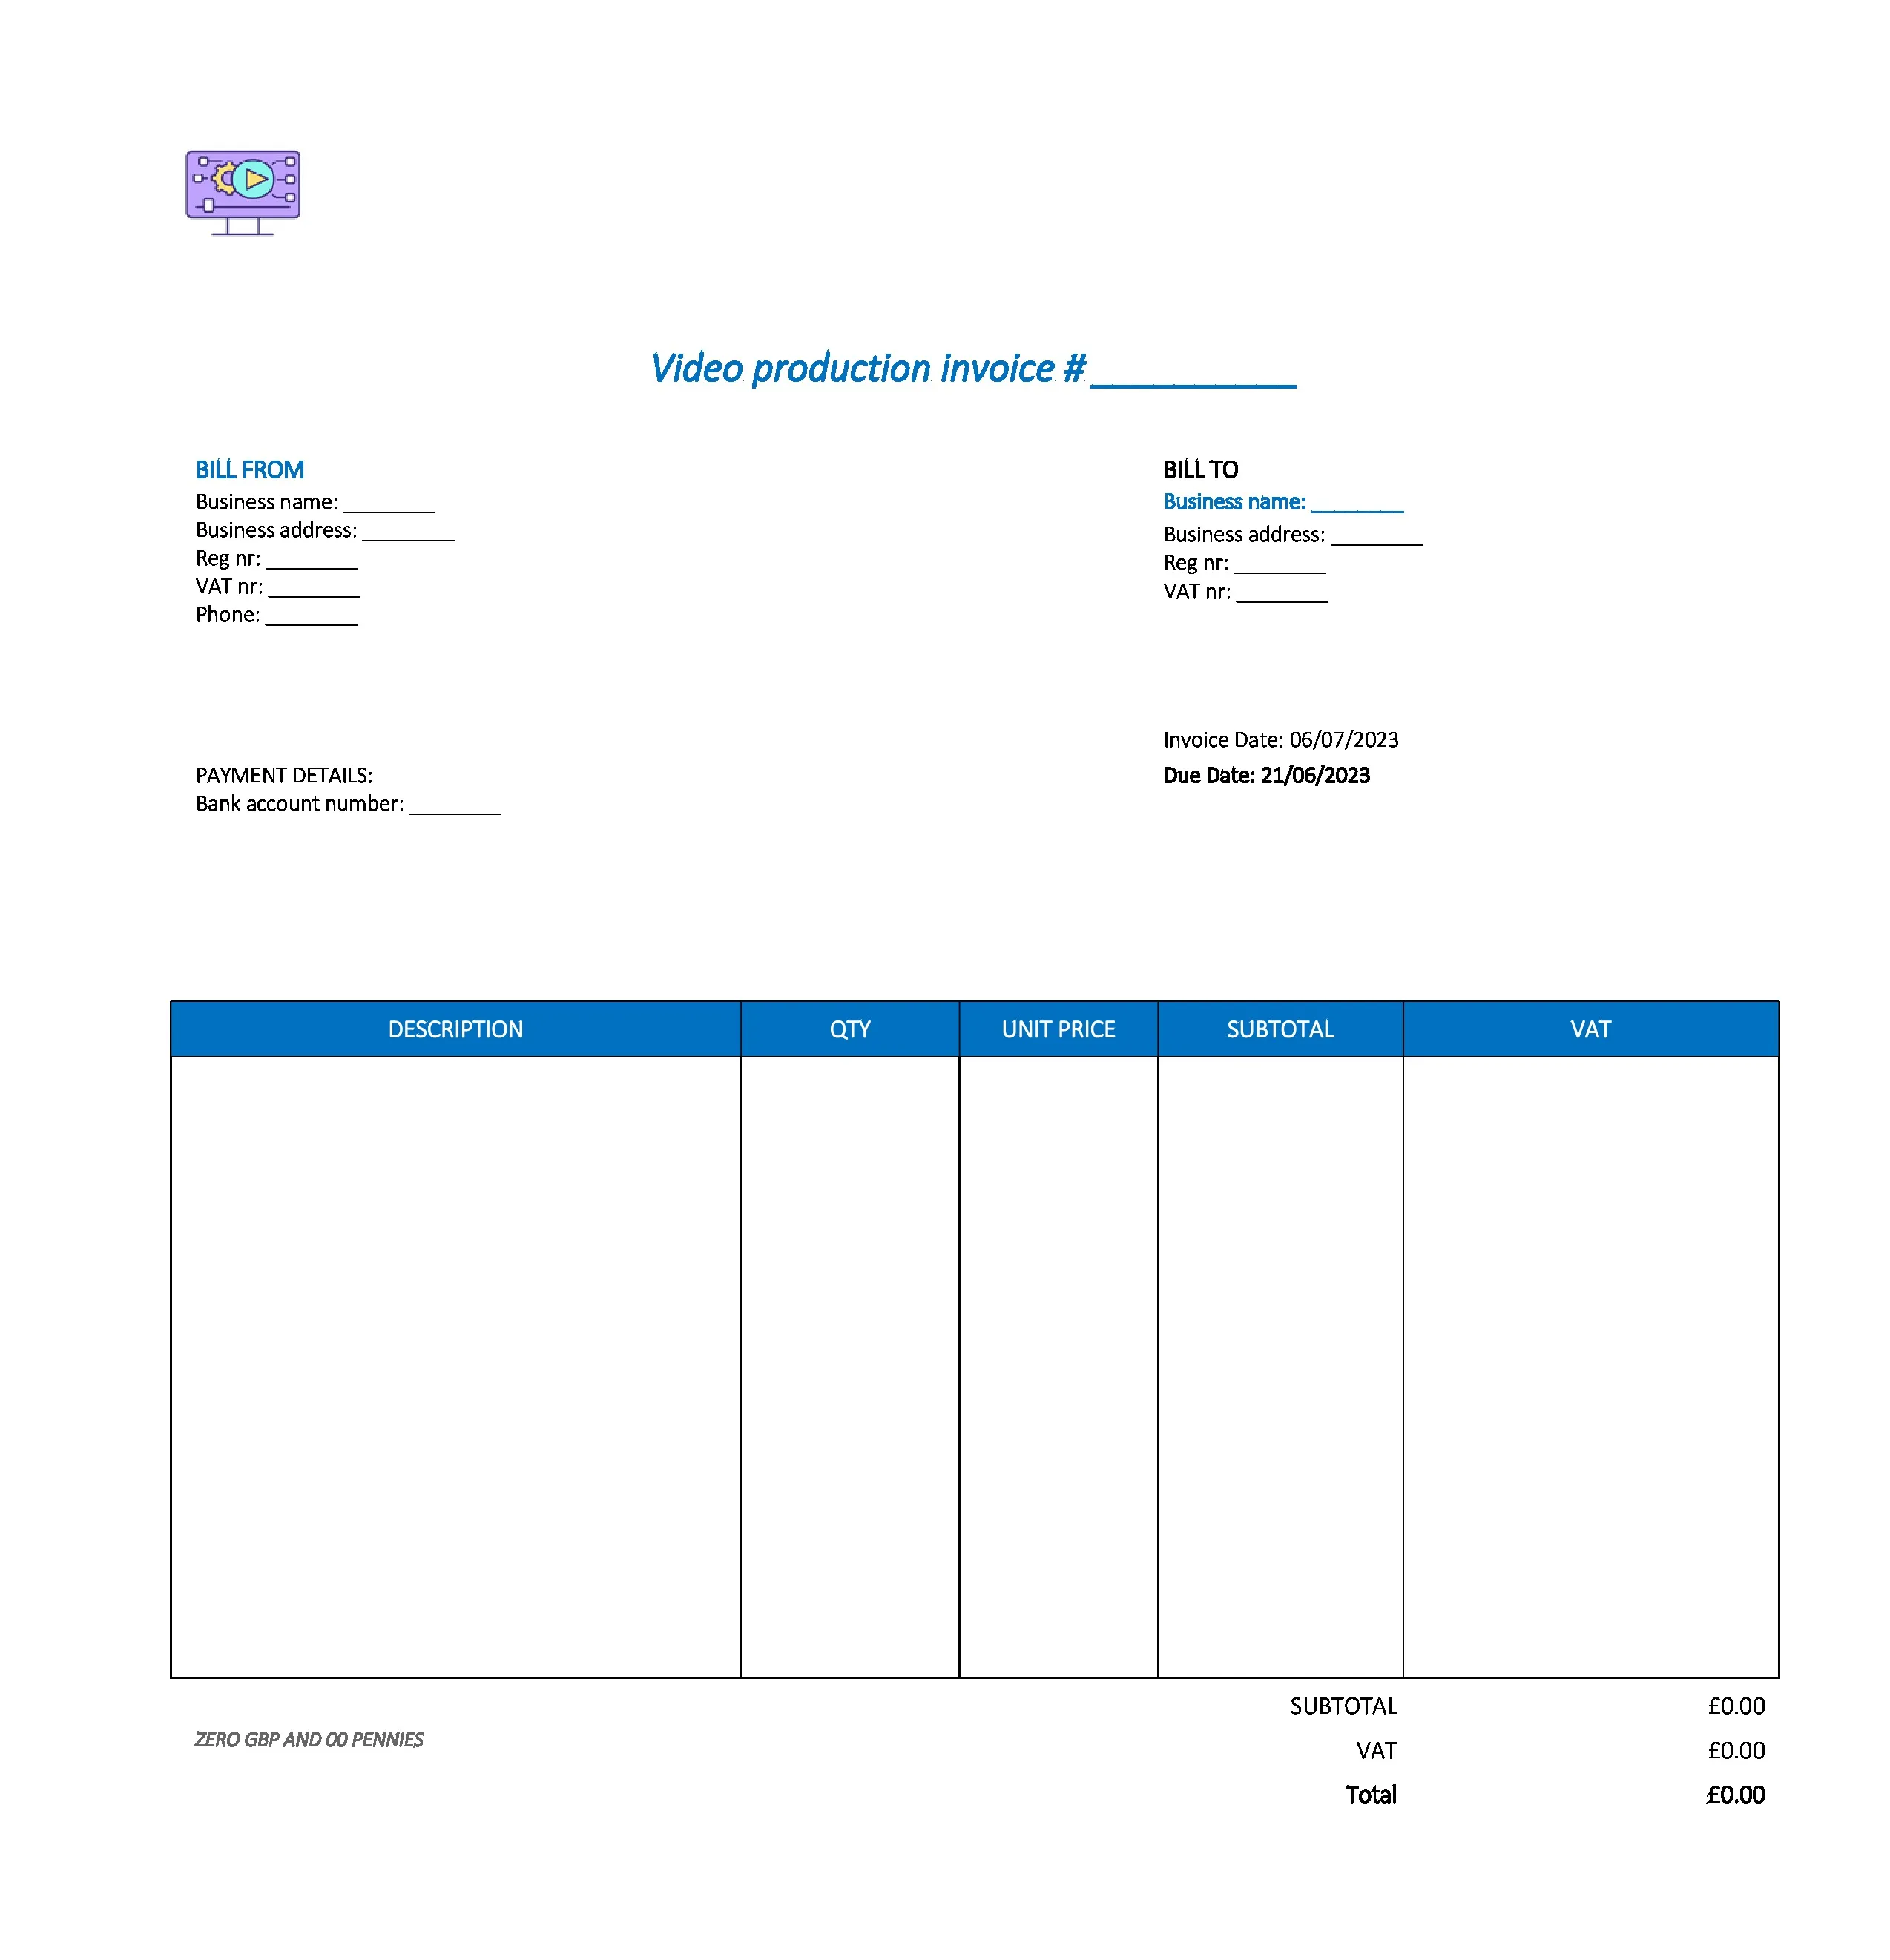 typical video production invoice template UK Excel / Google sheets